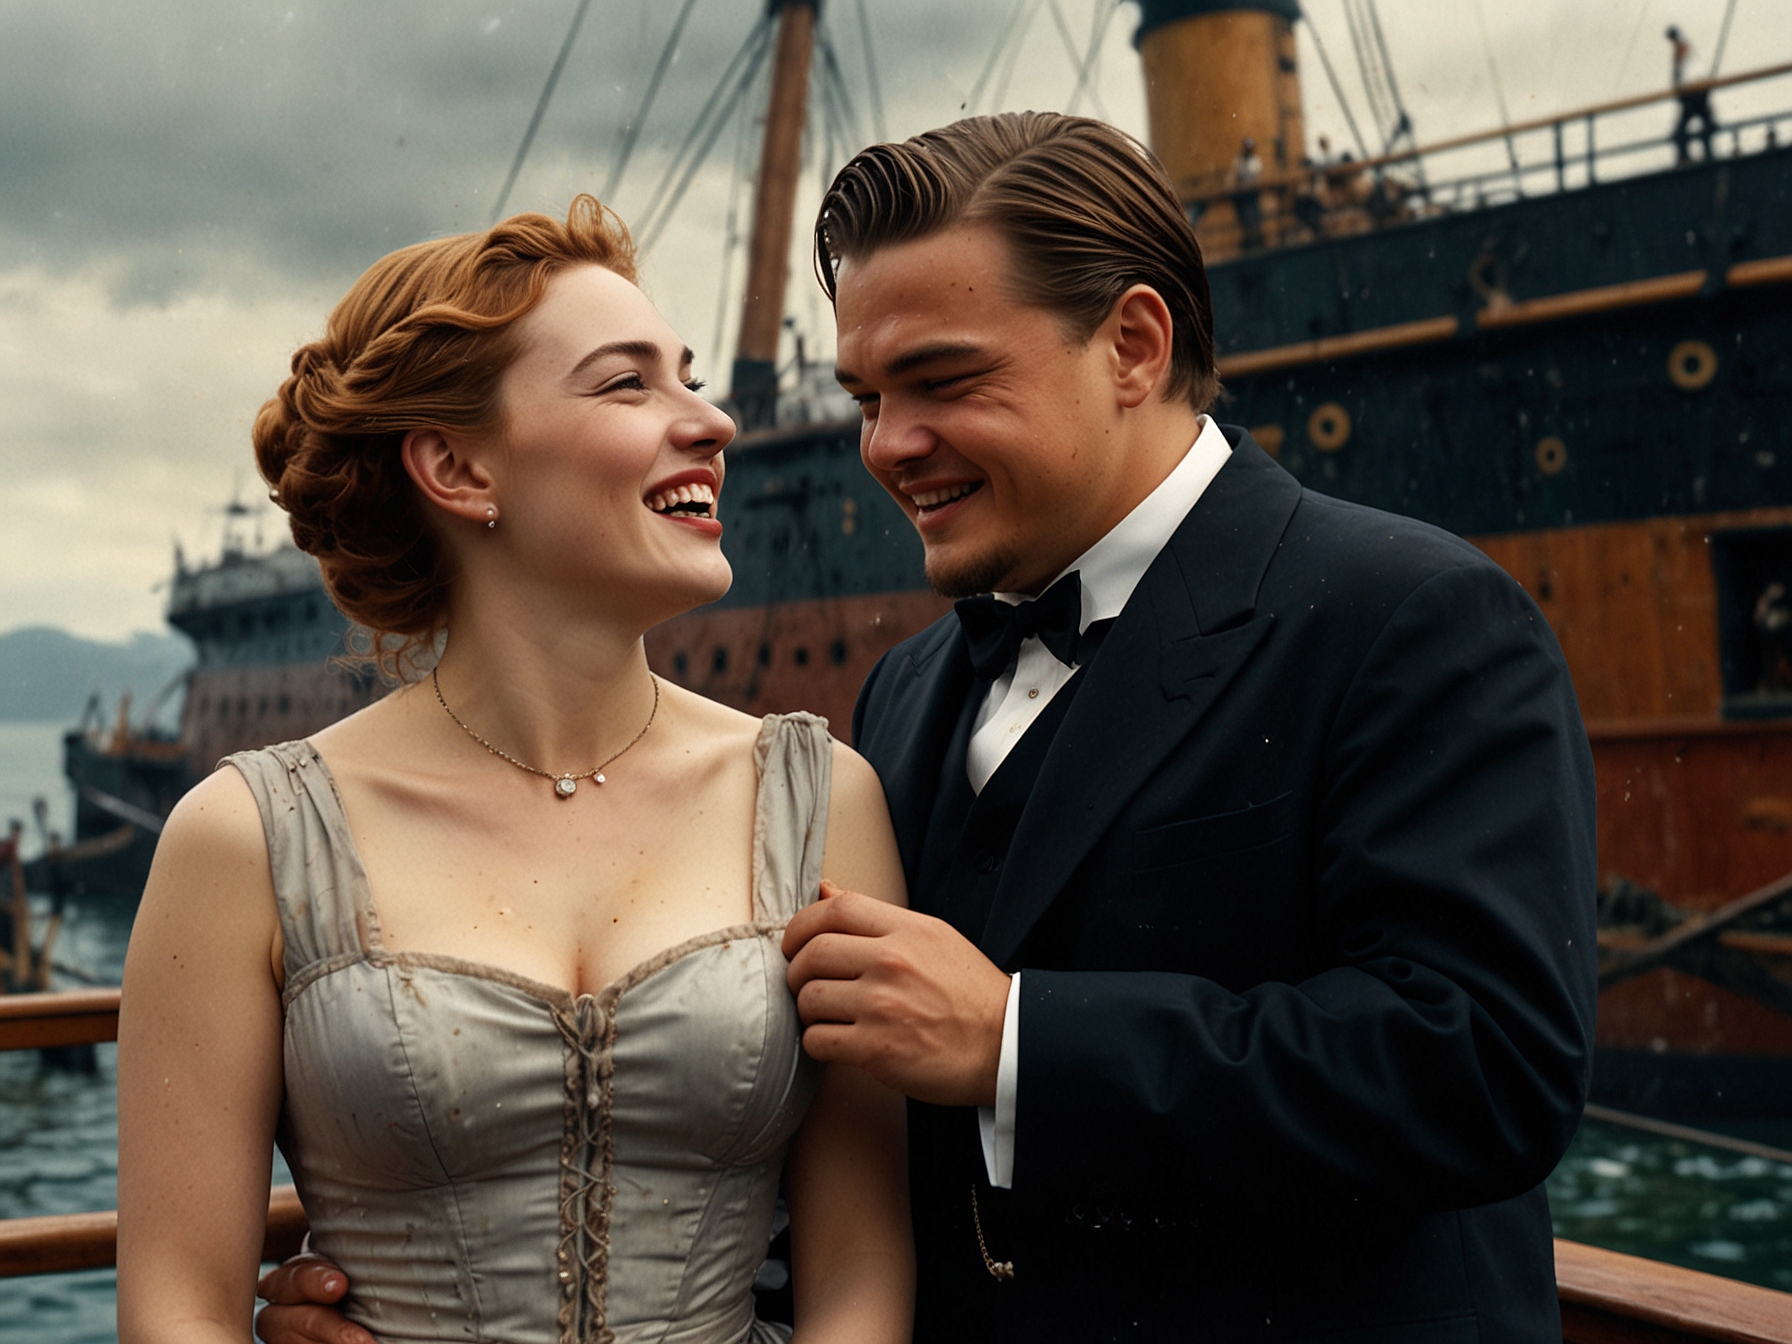 A candid moment between Kate Winslet and Leonardo DiCaprio during the filming of Titanic, with both actors laughing and their make-up artists attending to their drenched, disheveled appearances.